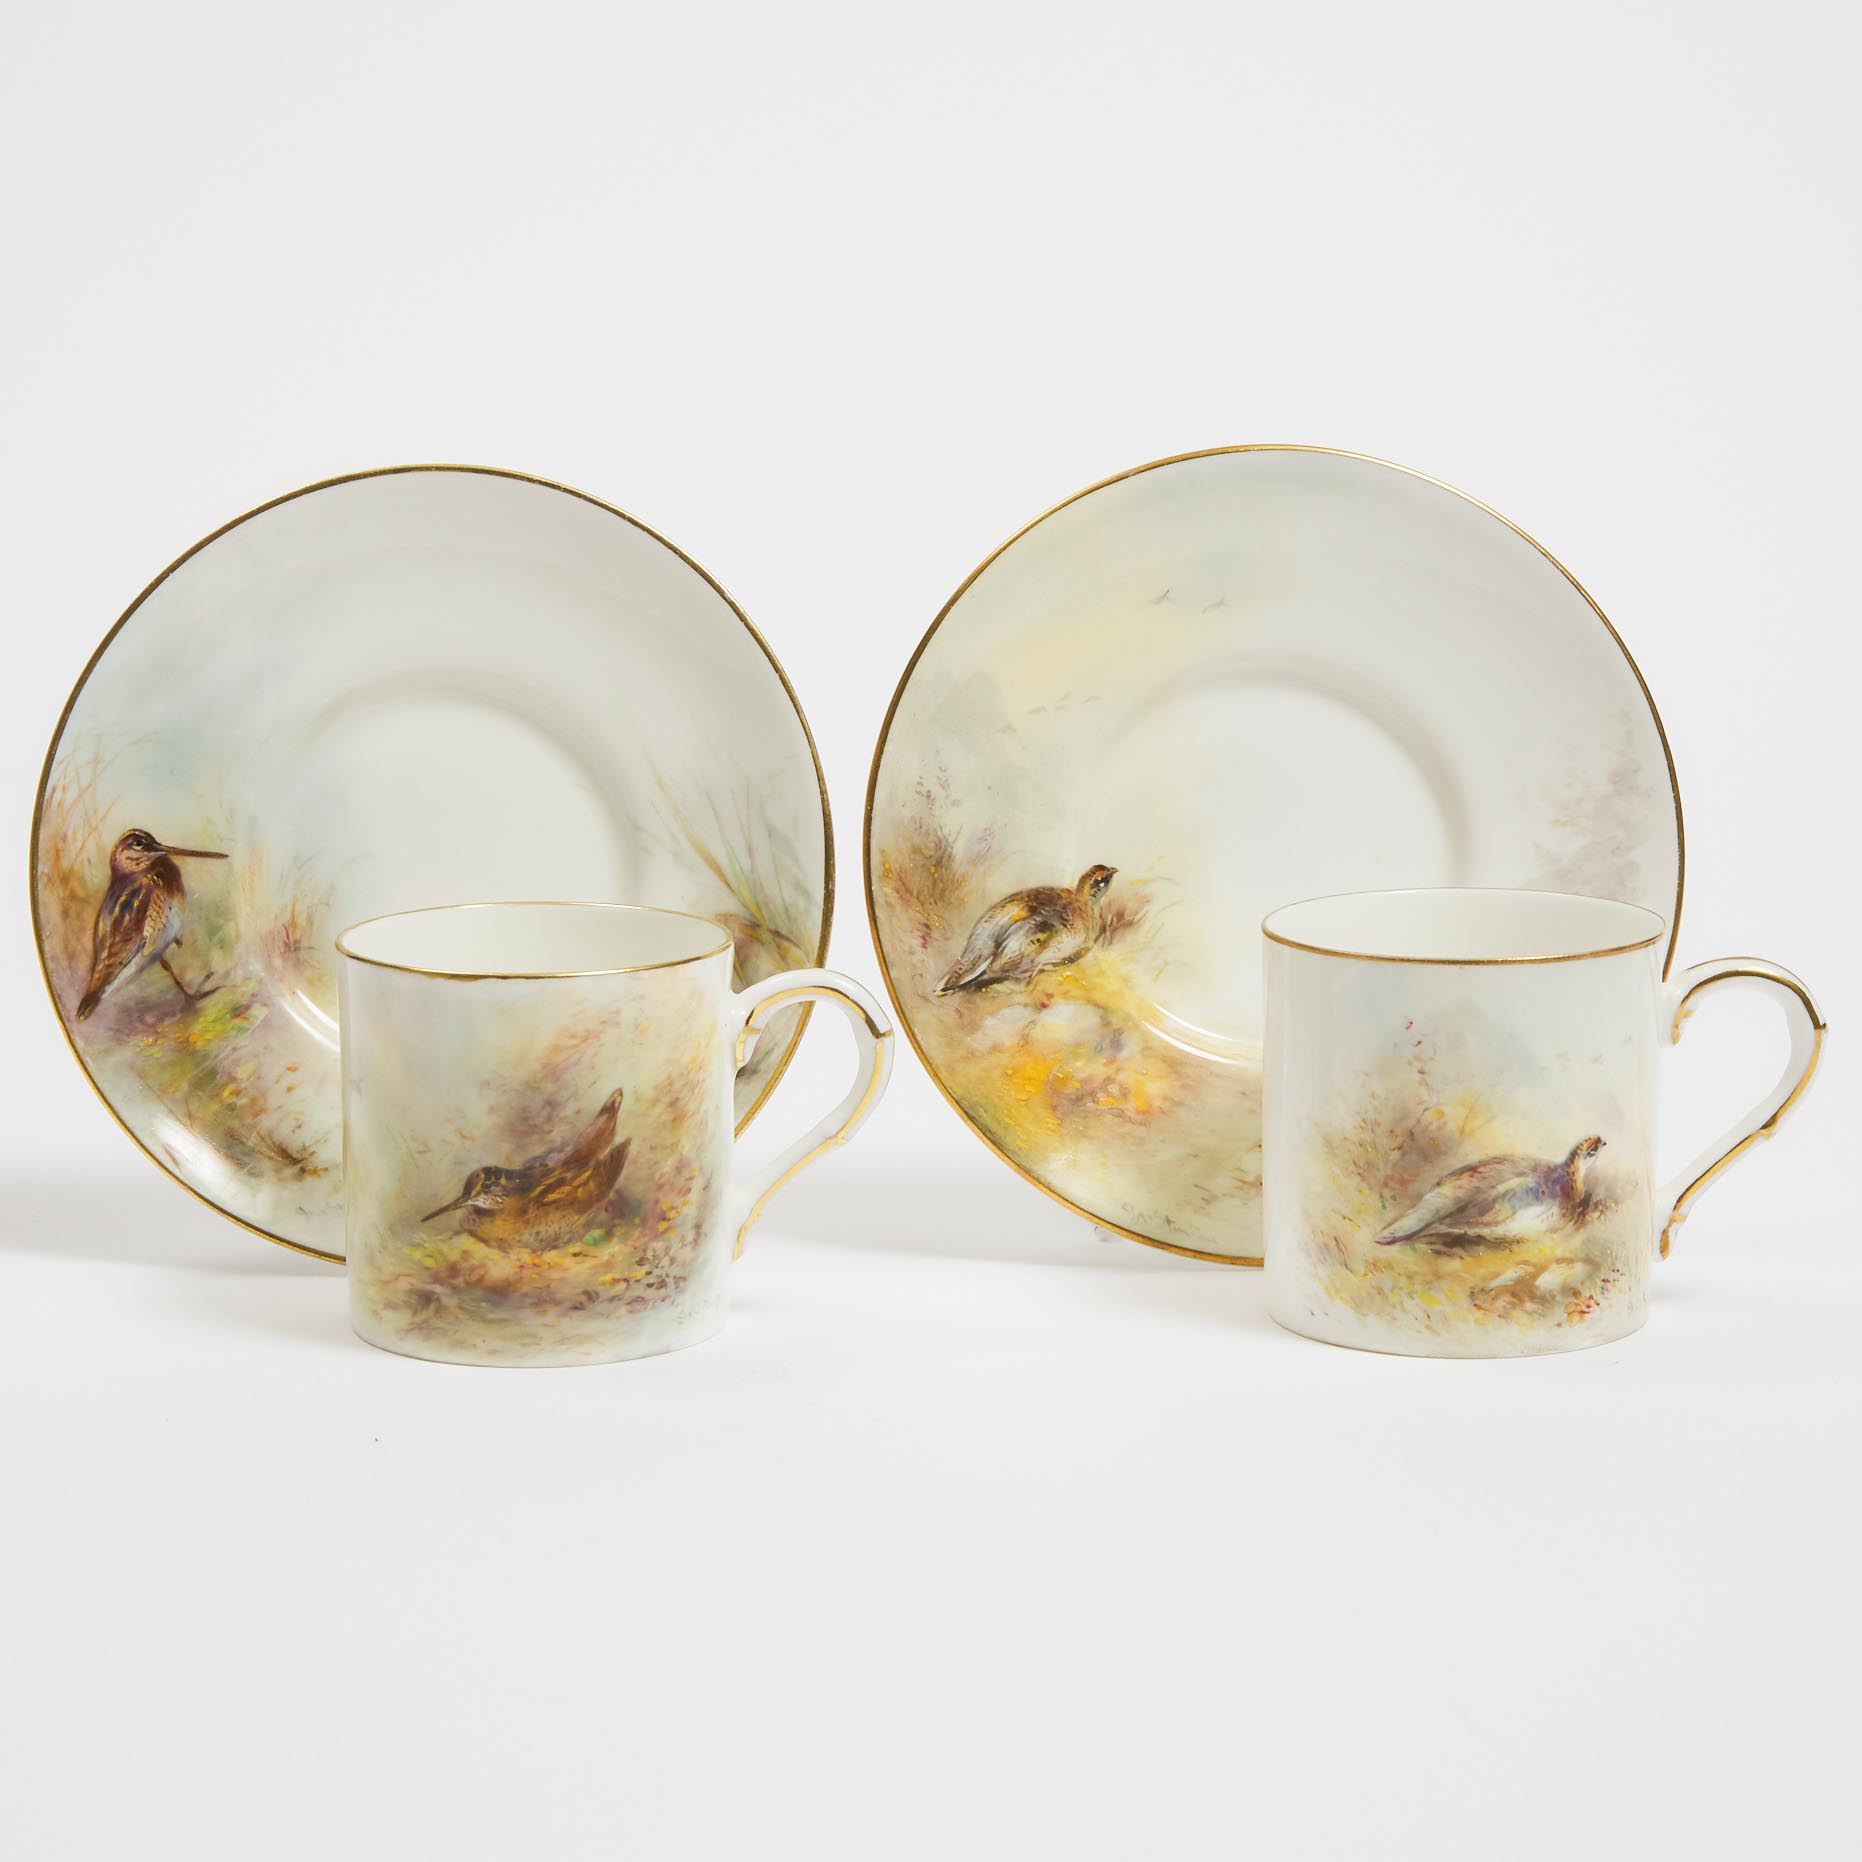 Pair of Royal Worcester Game Bird Coffee Cups and Saucers, James Stinton, c.1941